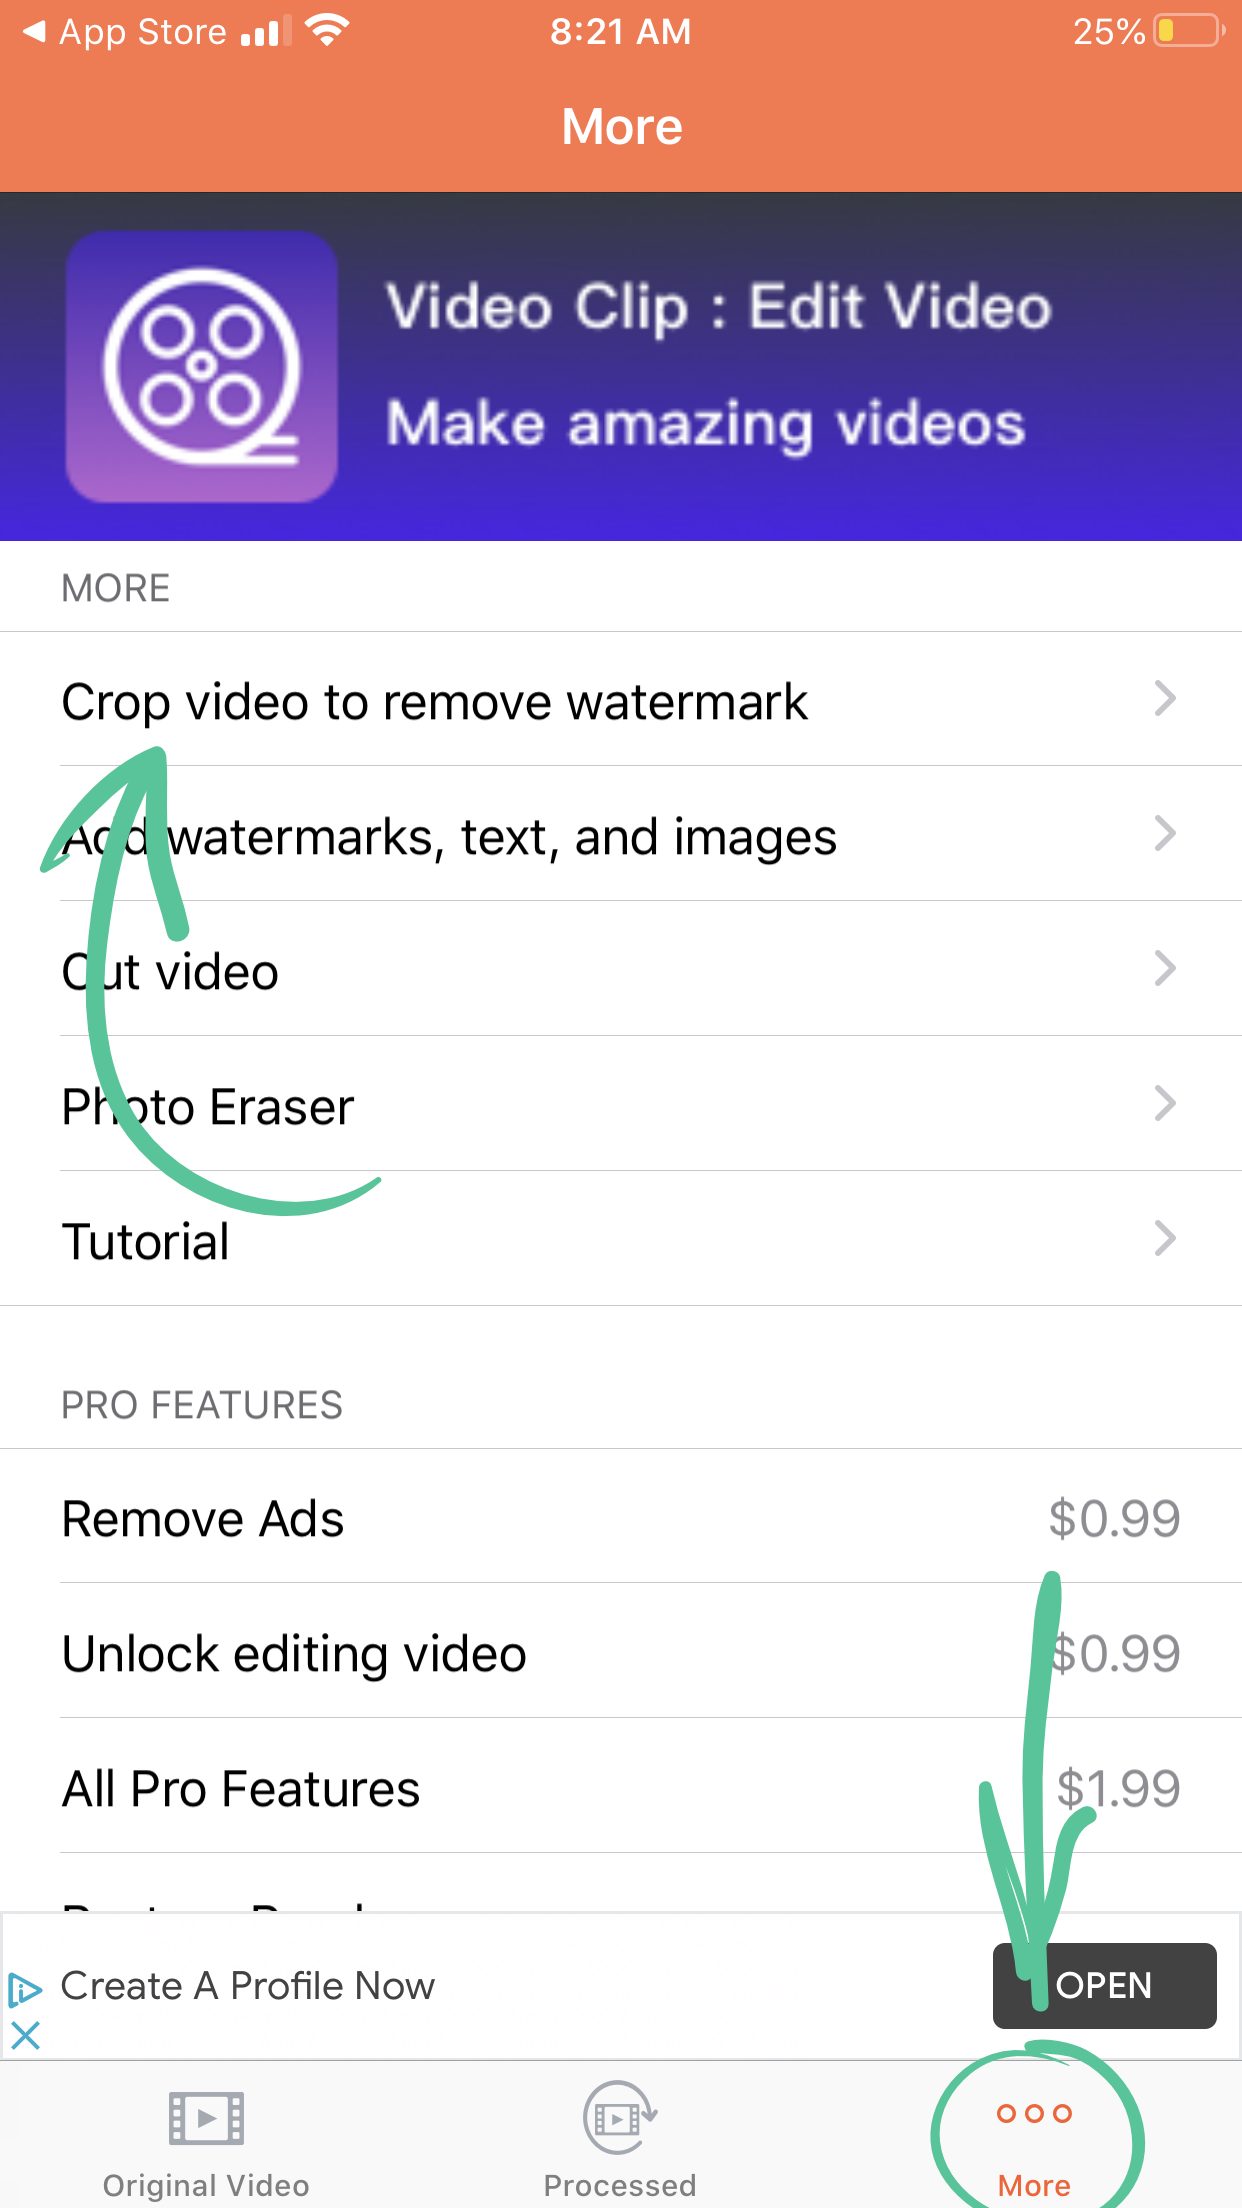 How to Download Video from TikTok Creative Center?